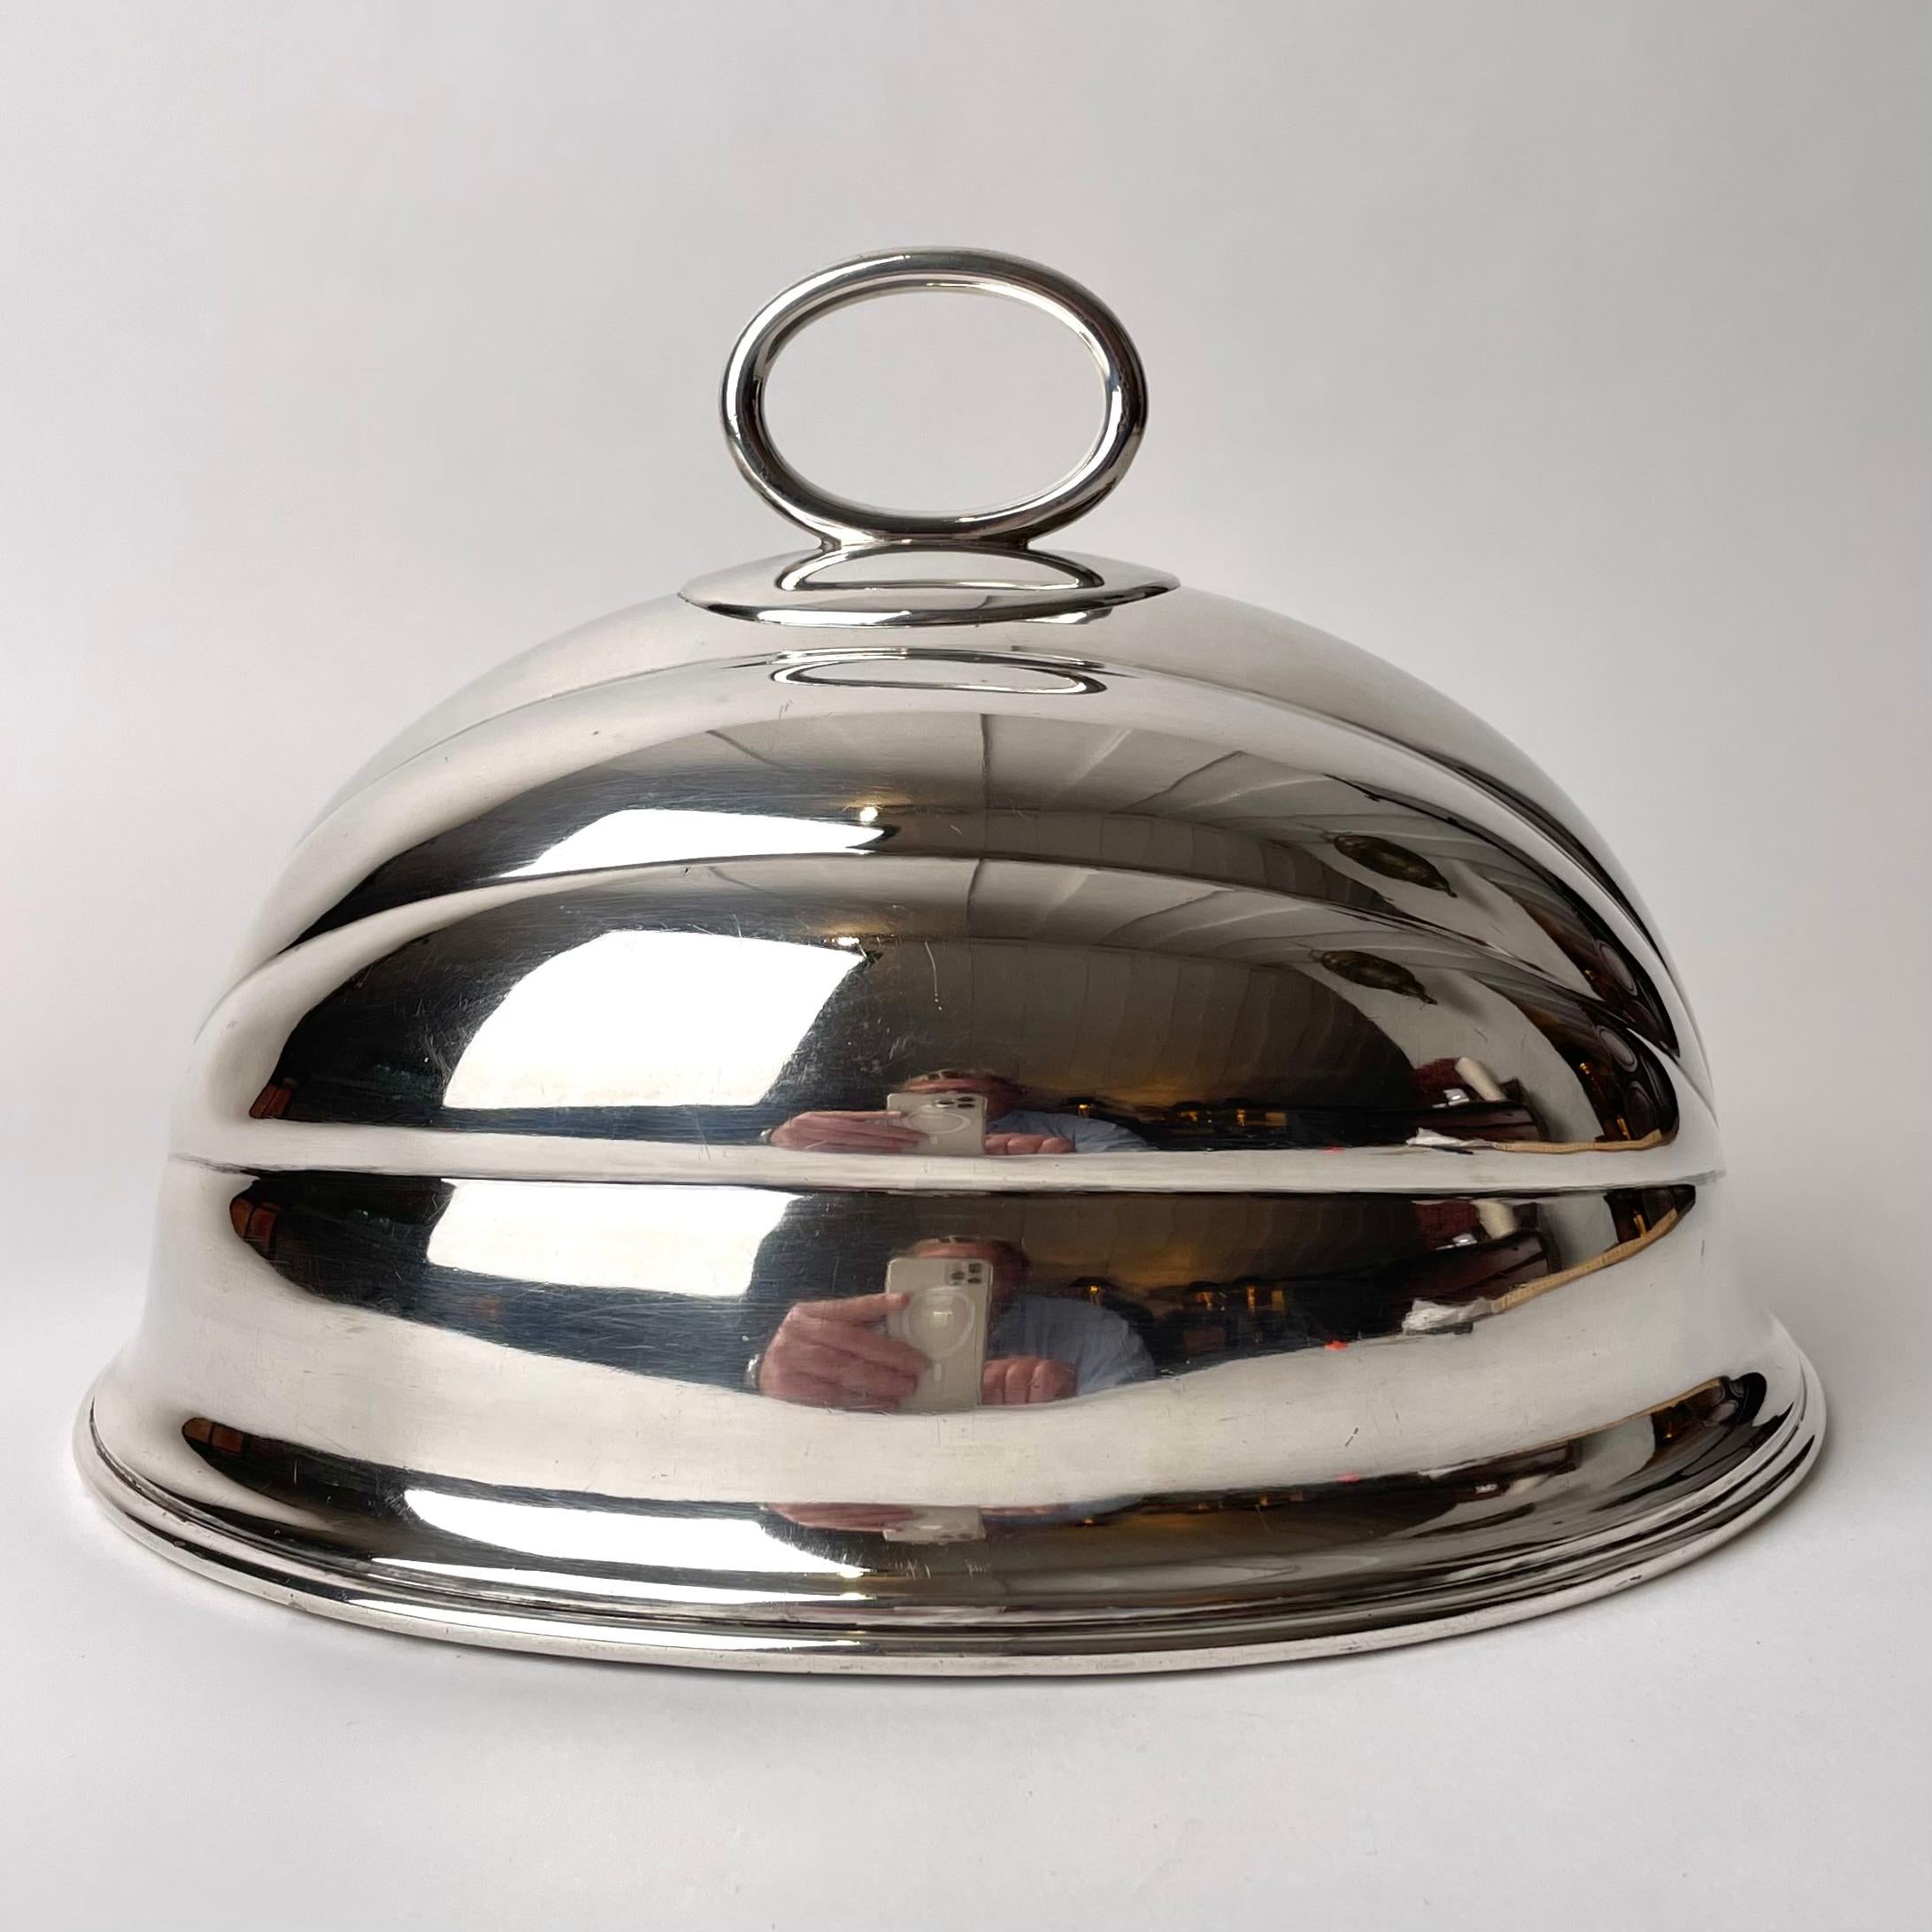 English Dome Cover Cloche in Sheffield Plate, Late 19th Century England by Mappin & Webb For Sale